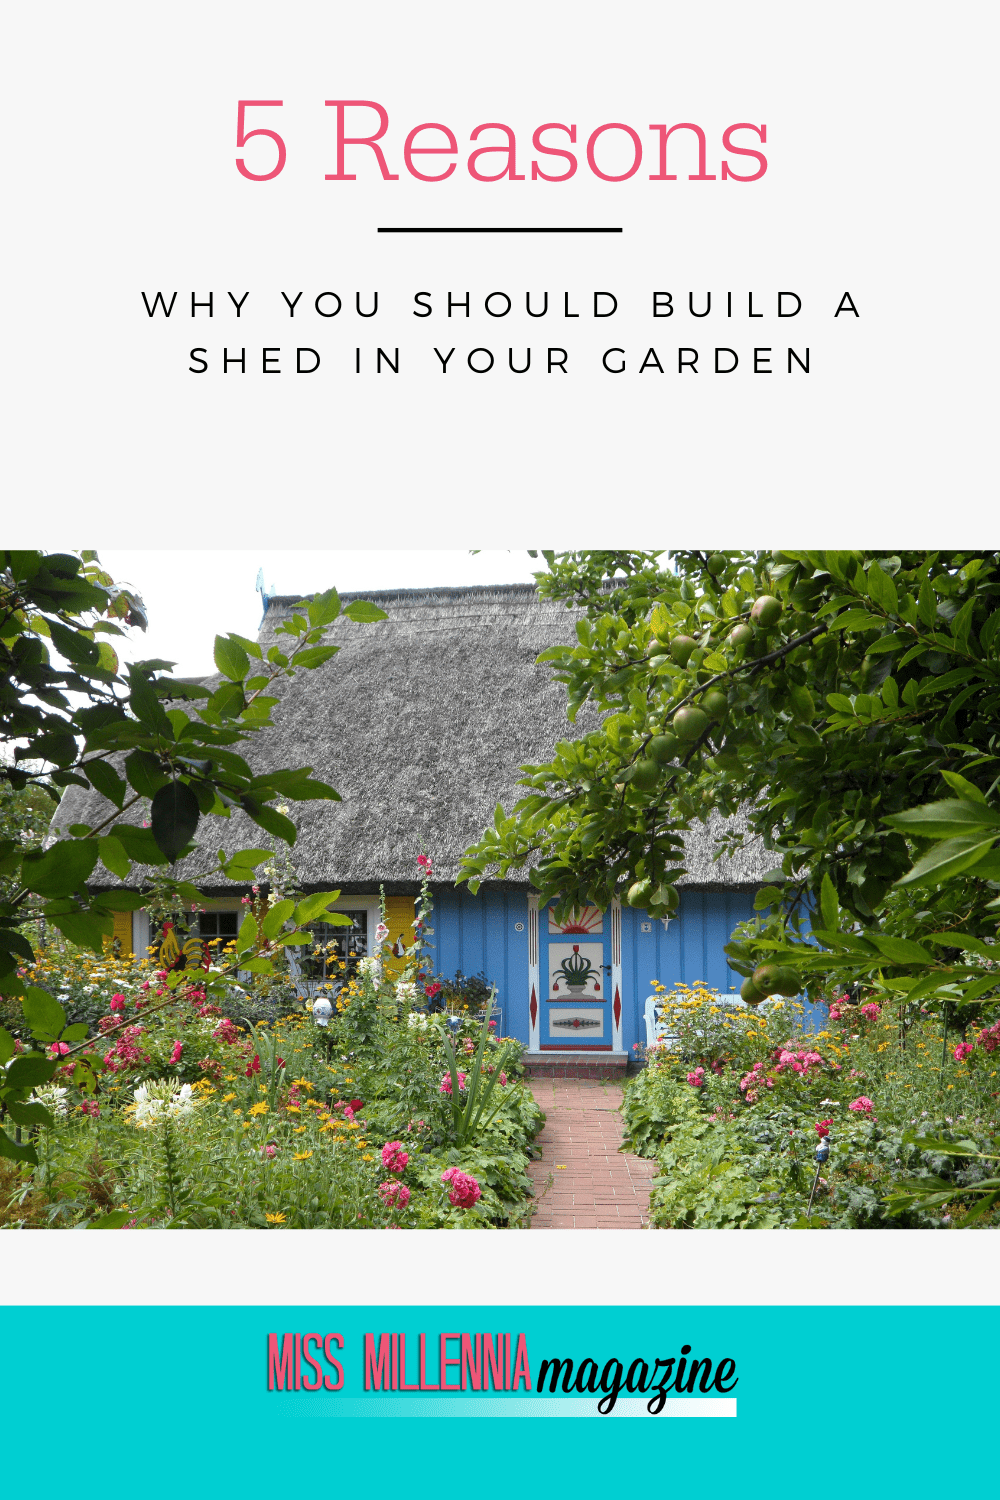 5 Reasons Why You Should Build a Shed in Your Garden